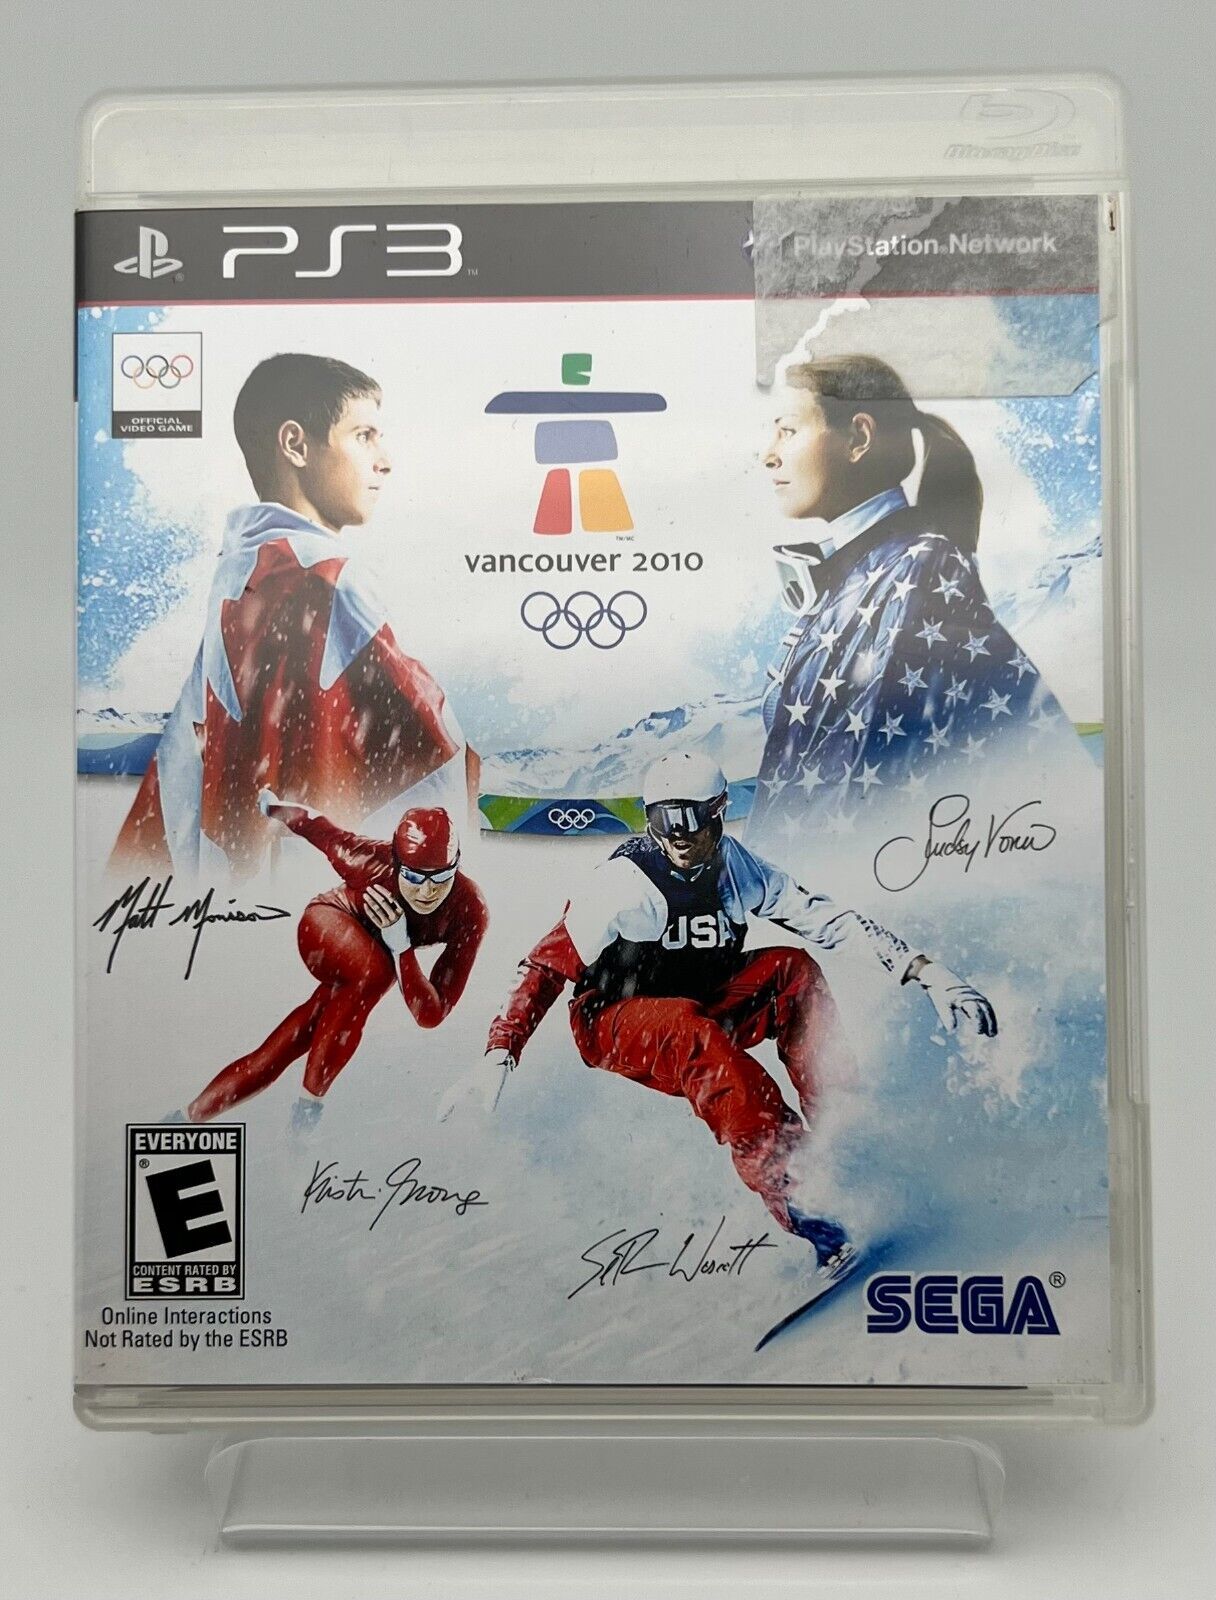 Primary image for Vancouver 2010 (Sony Playstation 3) Complete in Box- Disc is MINT